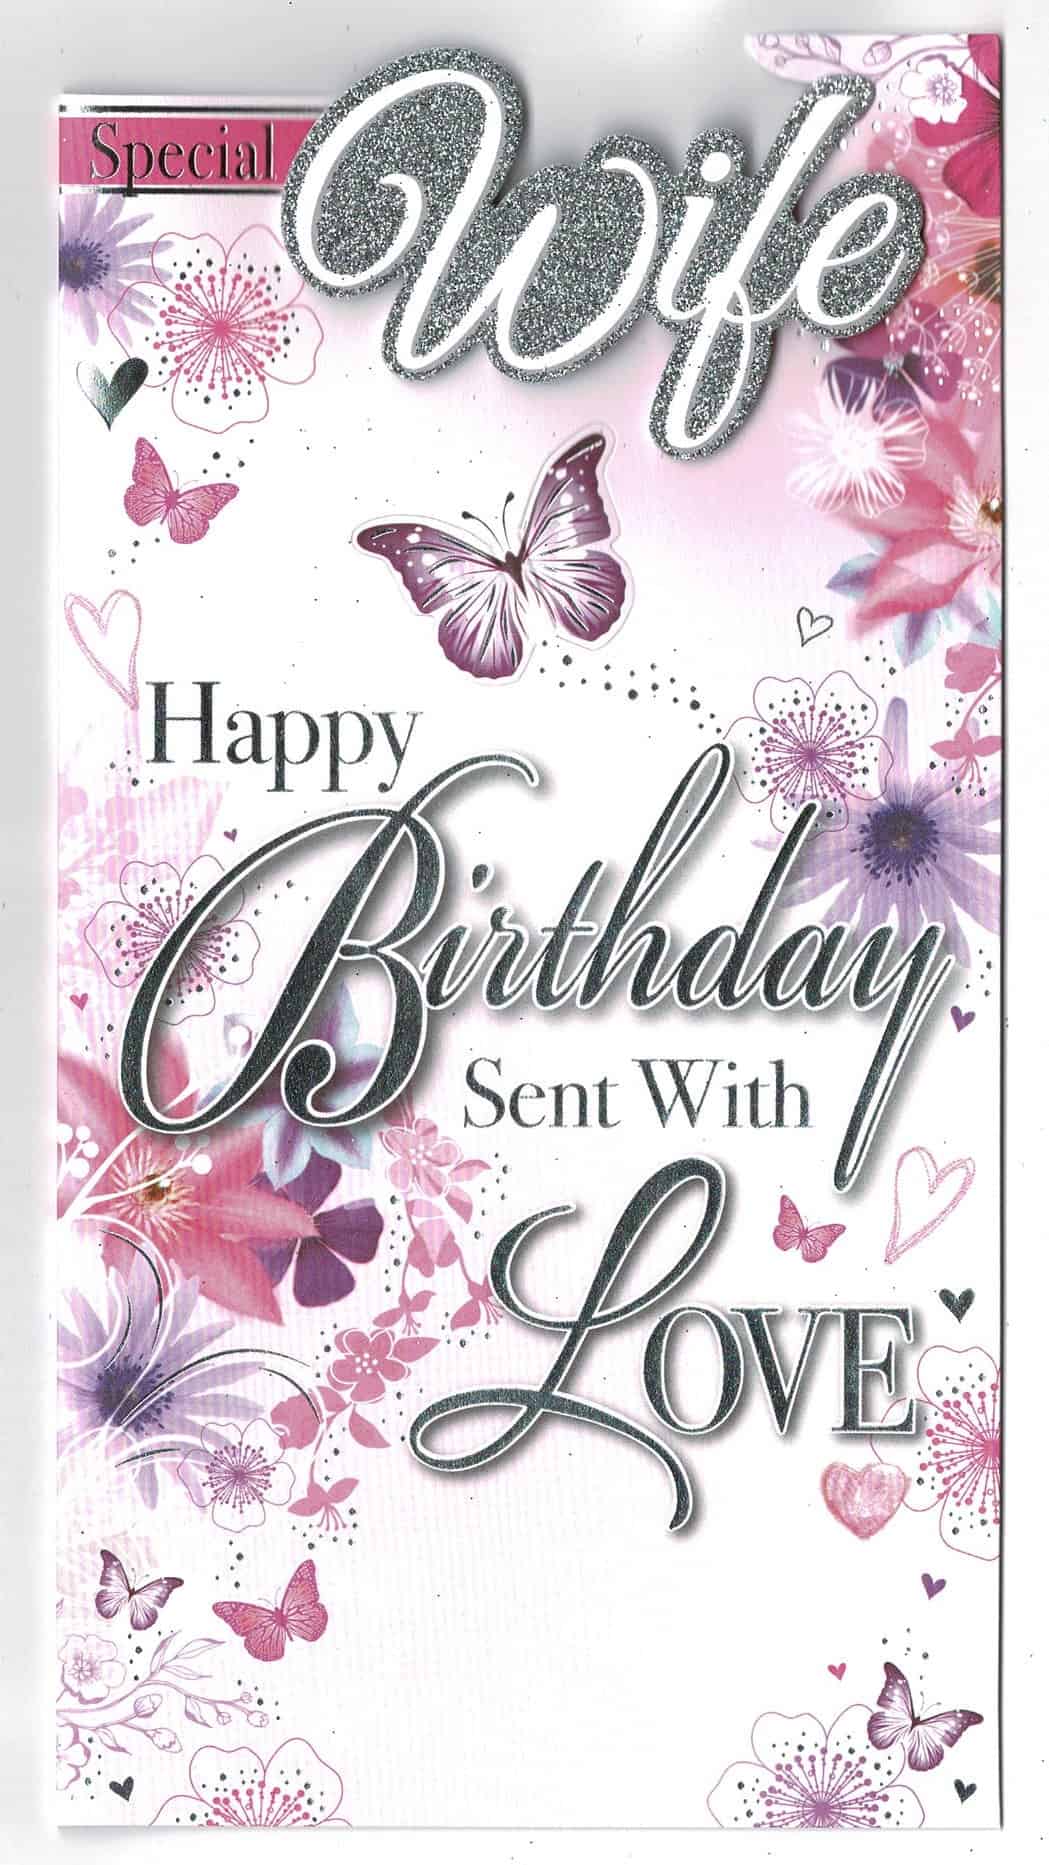 wife-birthday-card-special-wife-happy-birthday-with-love-gifts-cards